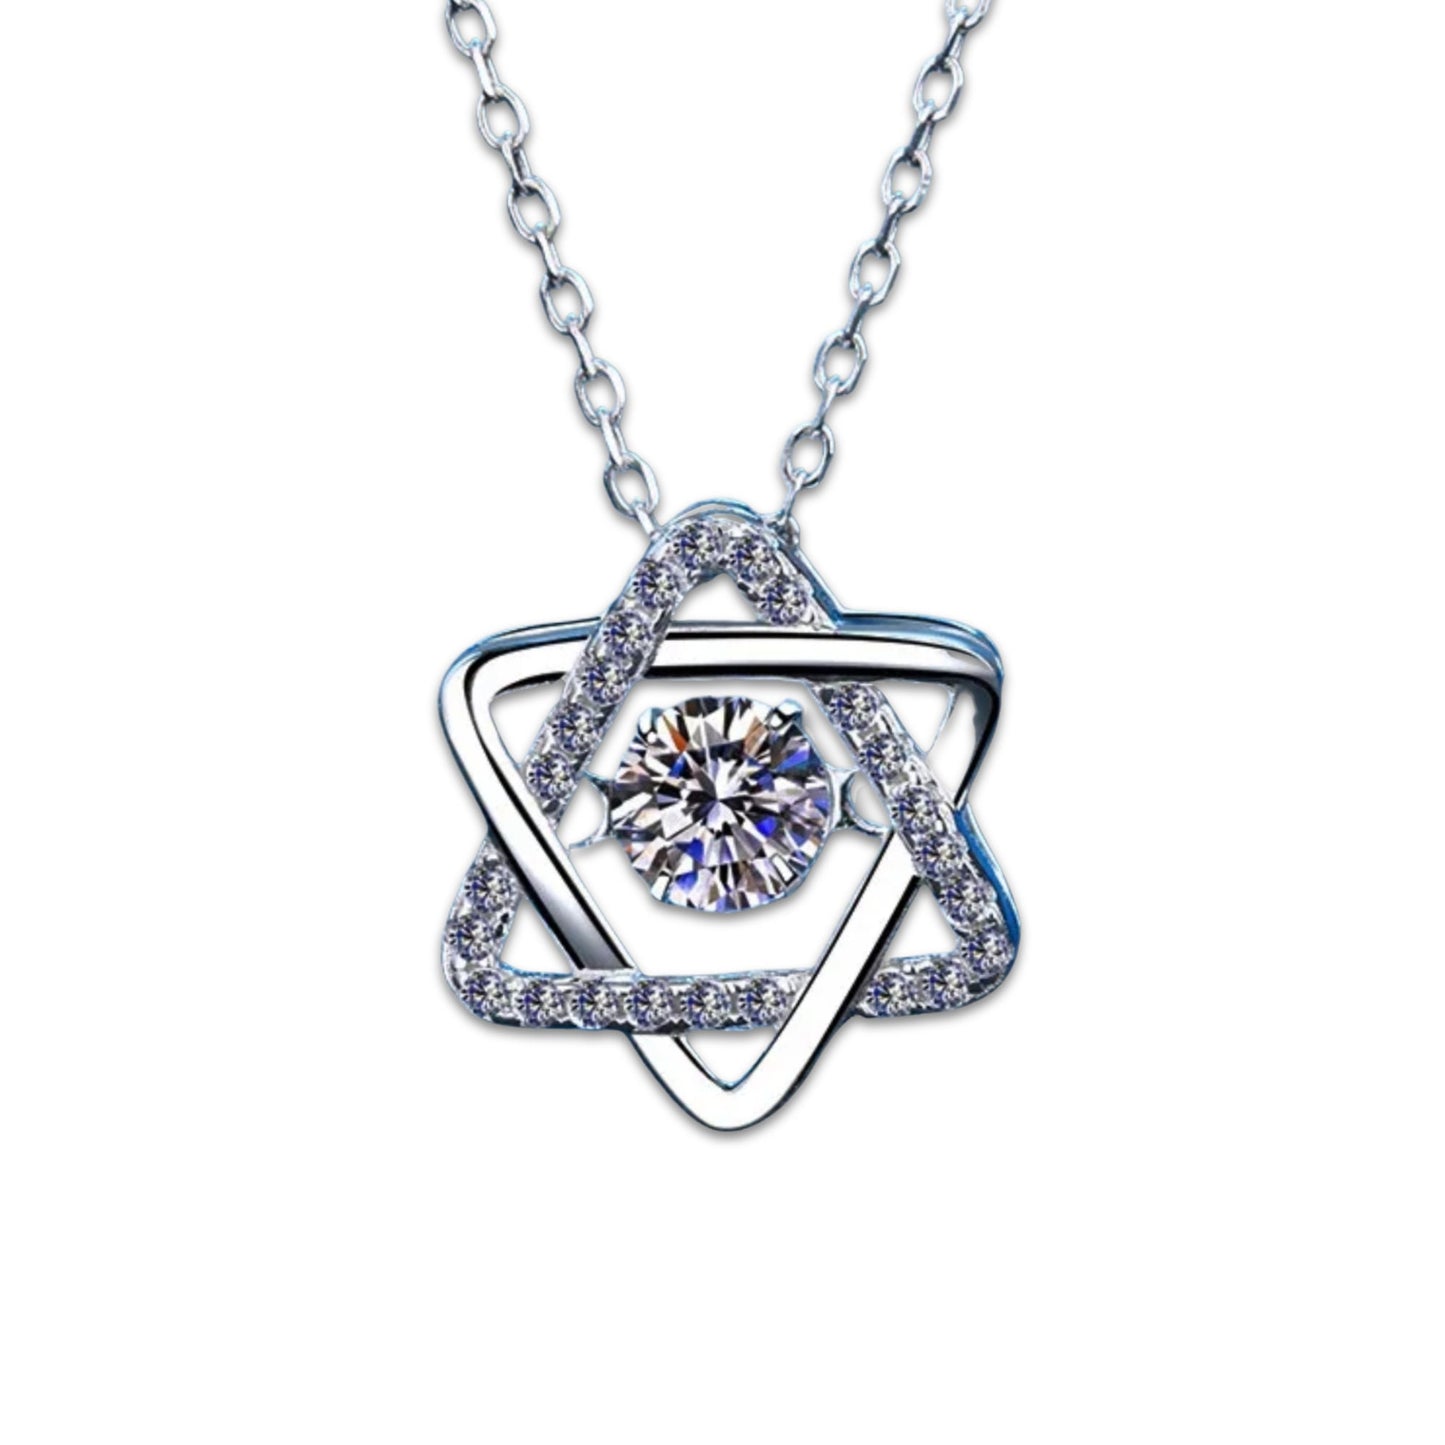 Sterling Silver Star Of David Necklace